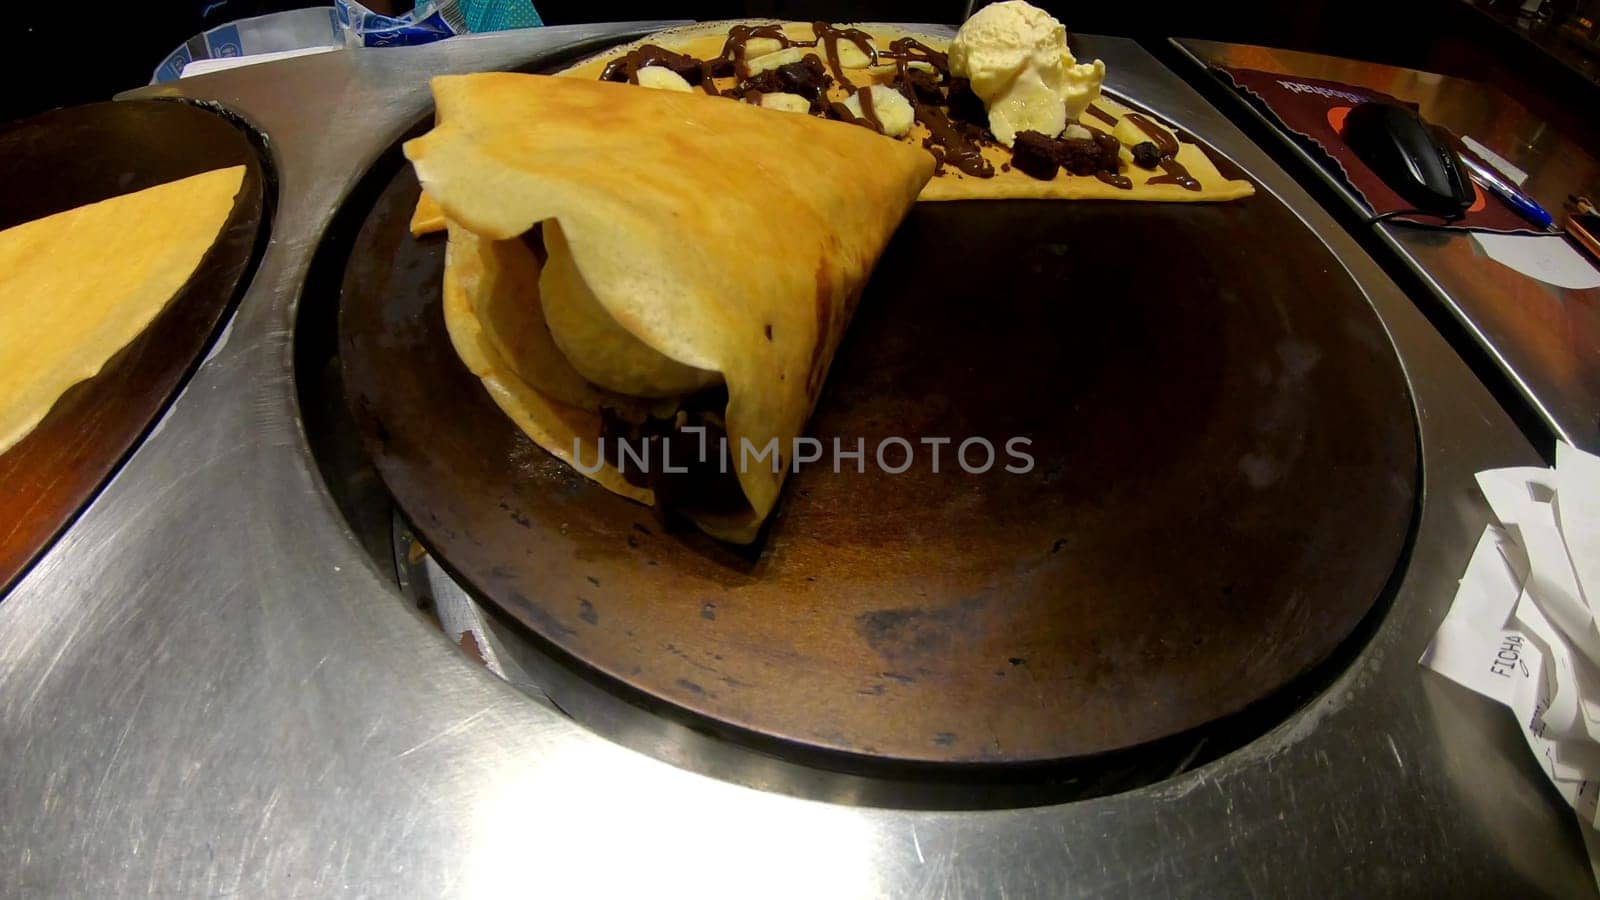 Scrumptious folded crepe topped with chocolate syrup and a scoop of vanilla ice cream, served on a rustic hot plate